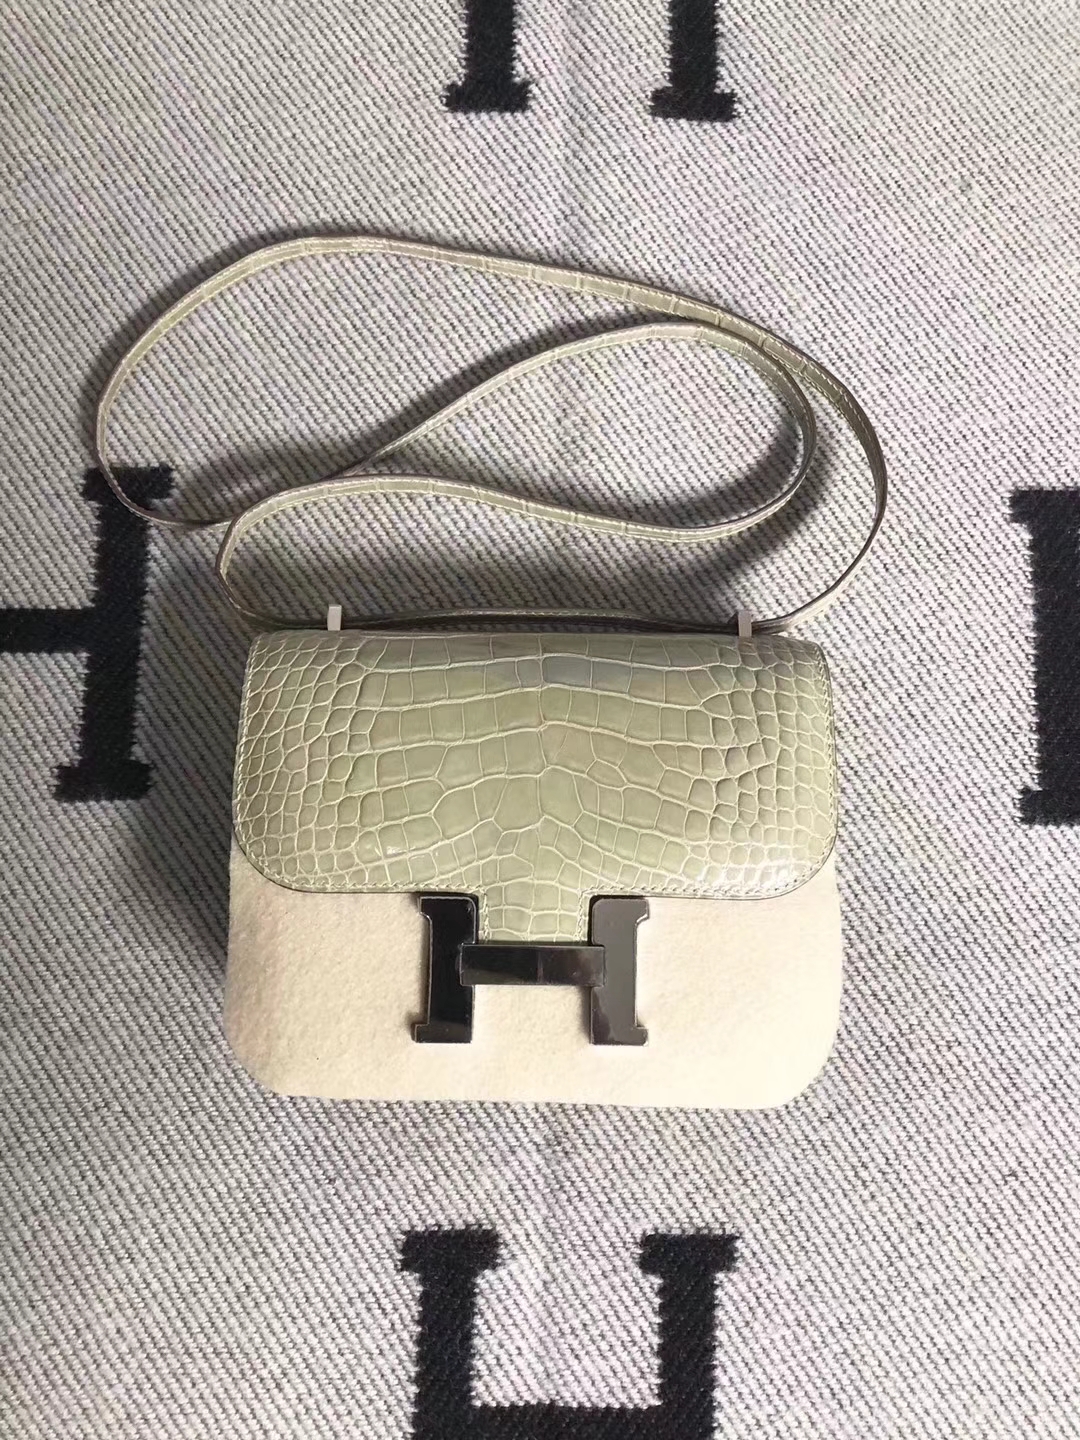 Hot Sale Hermes Shiny Crocodile Leather Minikelly Cluth Bag in Beton White